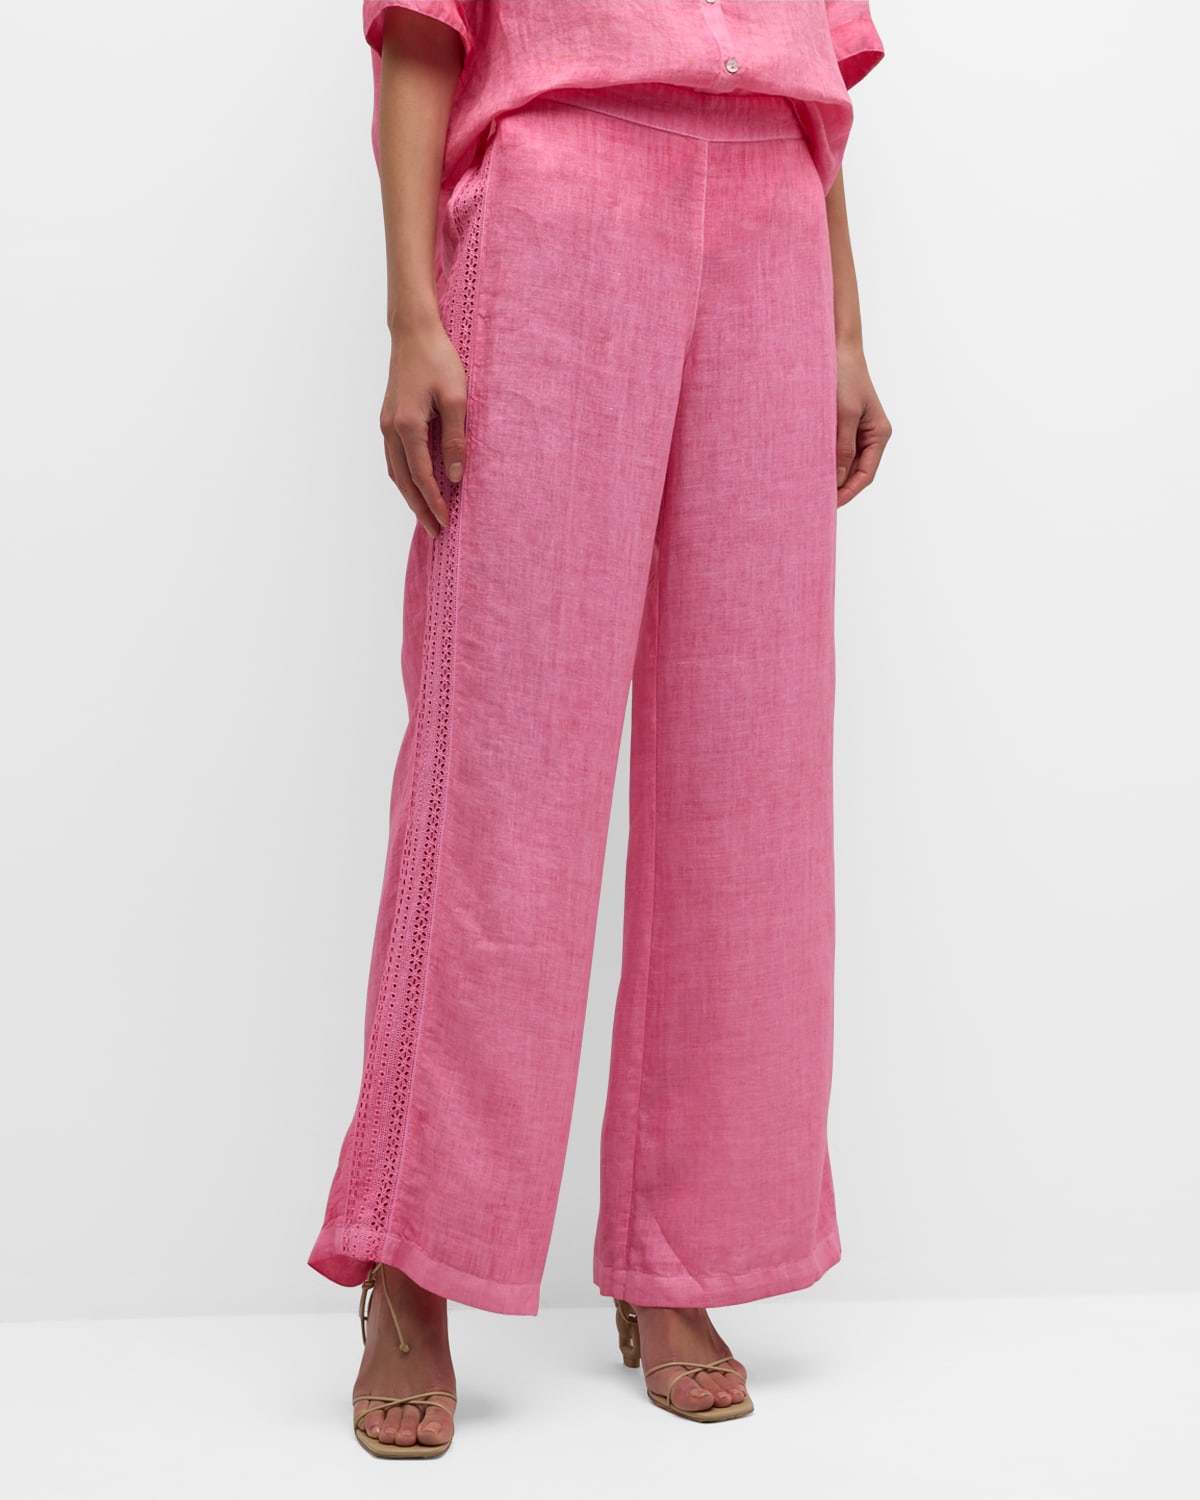 120% Lino Embroidered Wide-leg Linen Pants In Fuxia Soft Fade